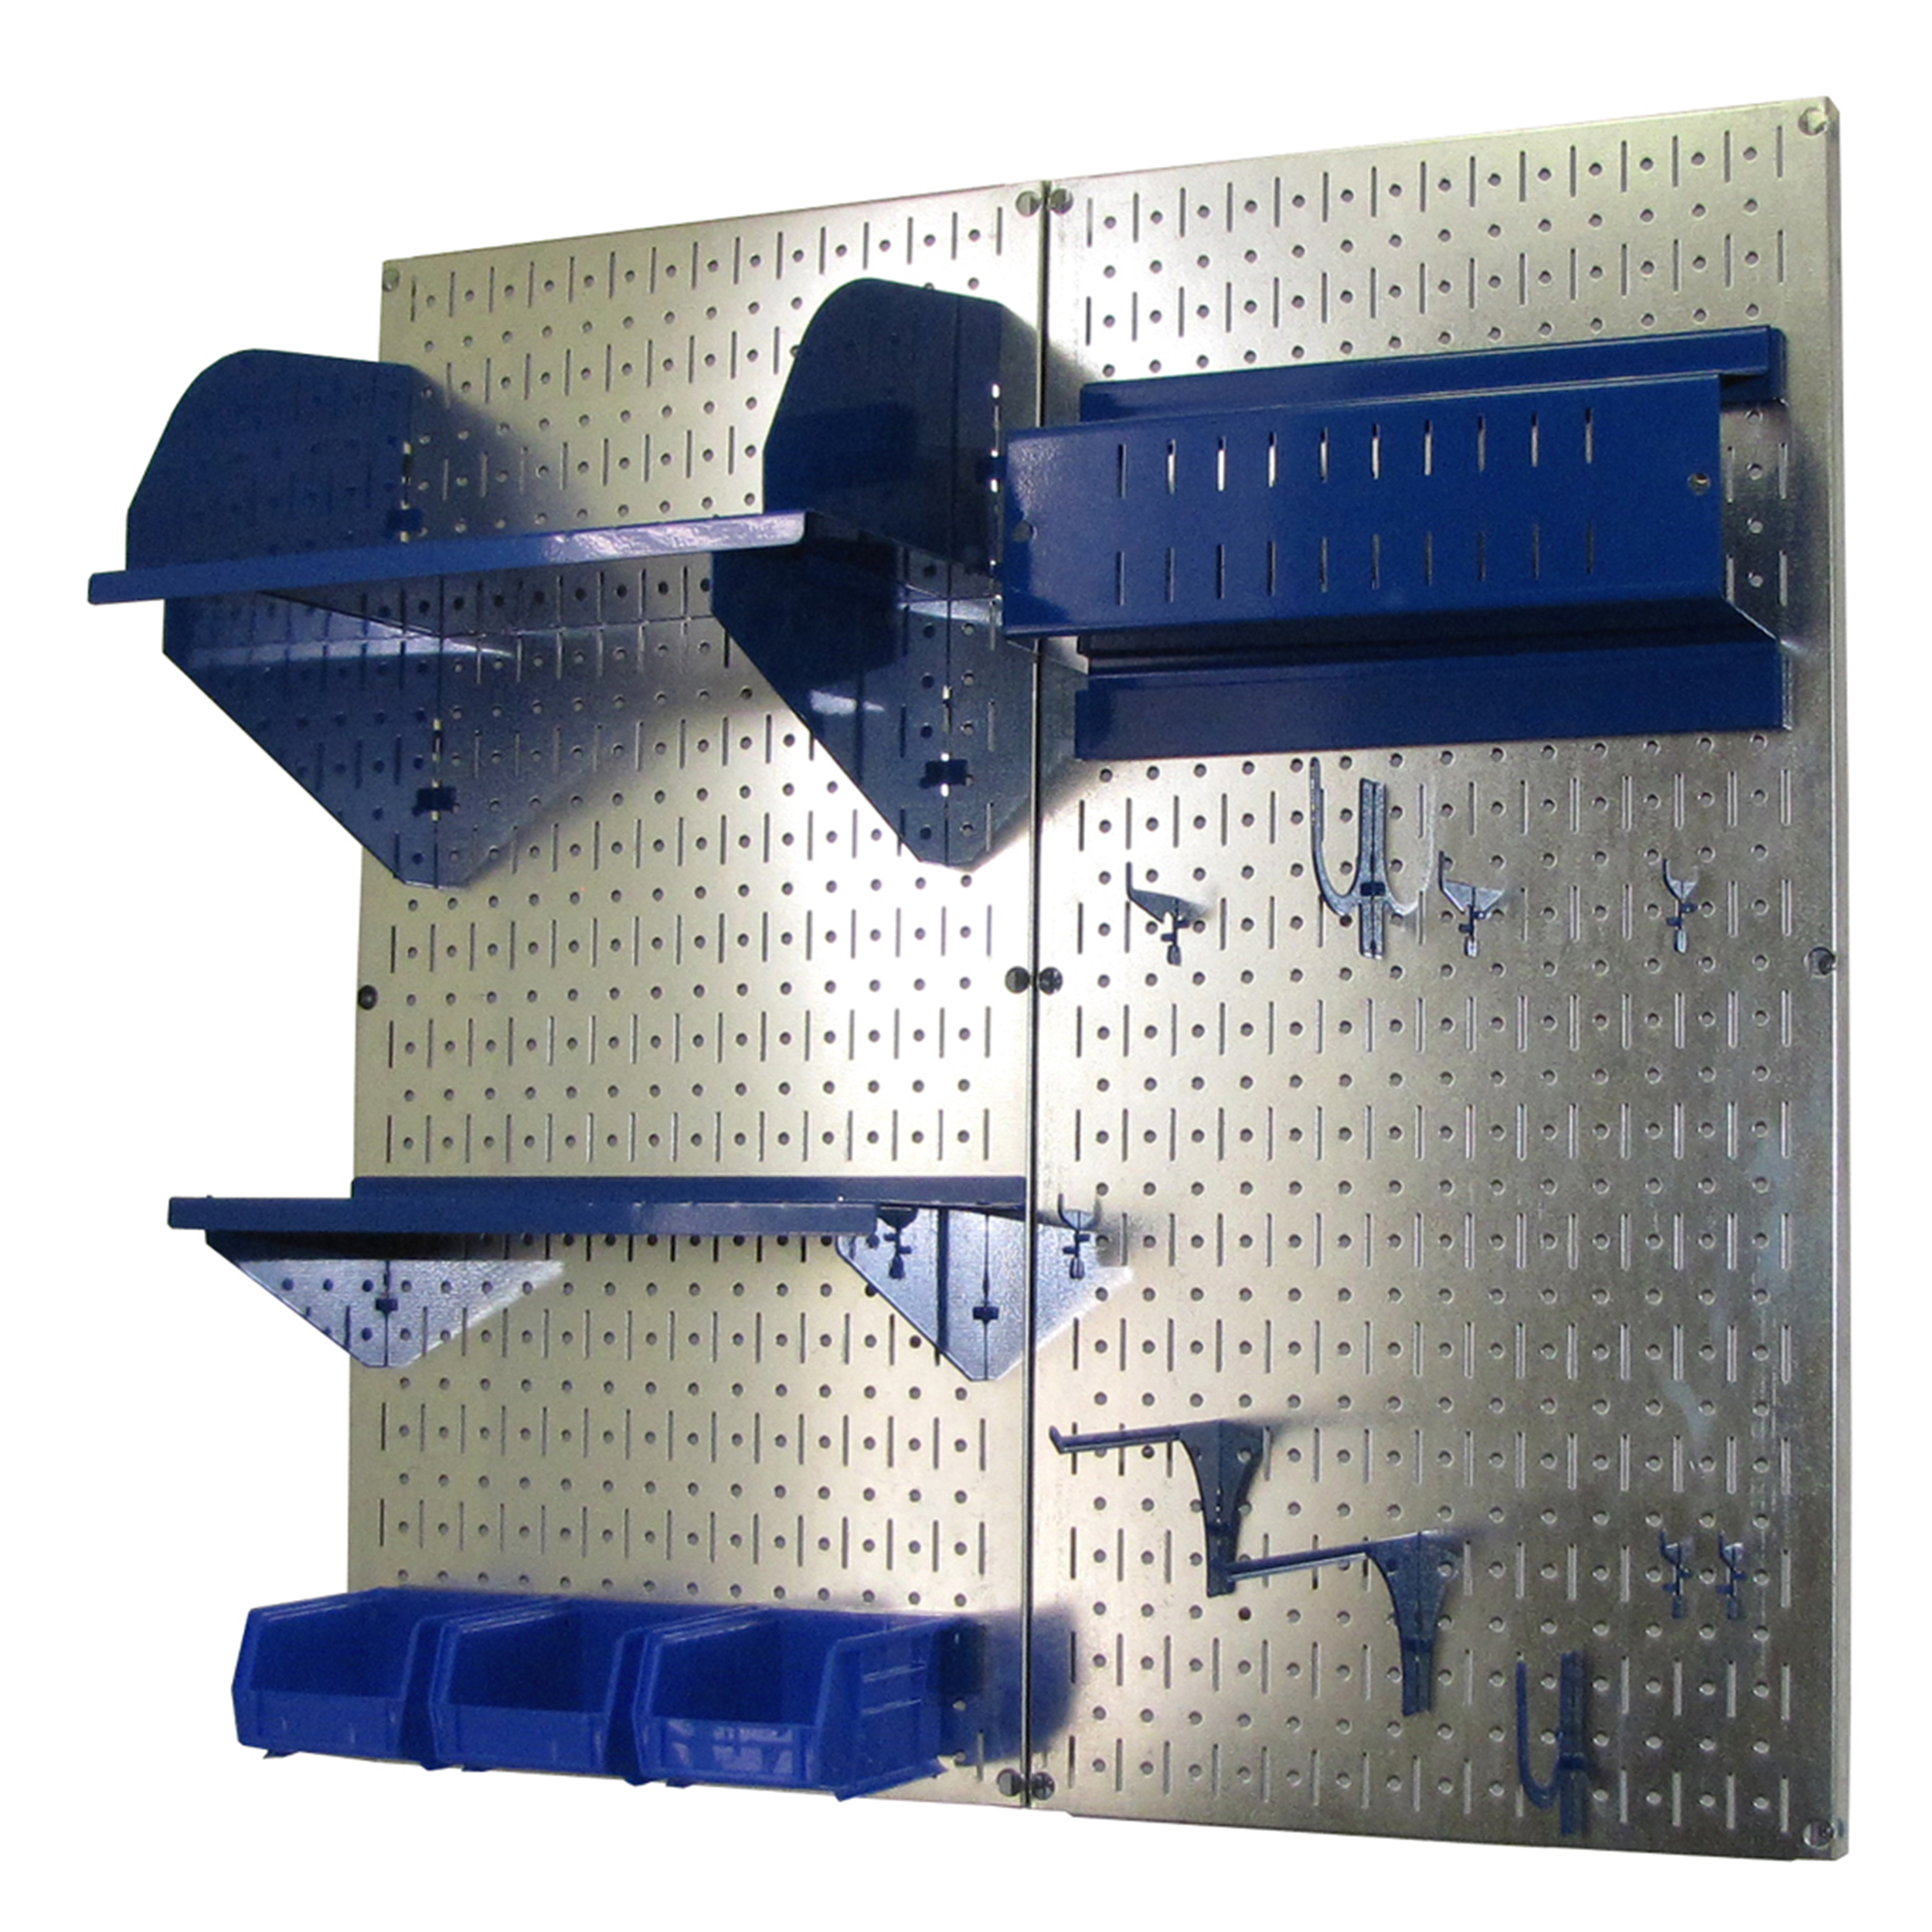 Pegboard Hobby Craft Pegboard Organizer Storage Kit With Metallic Pegboard And Blue Accessories